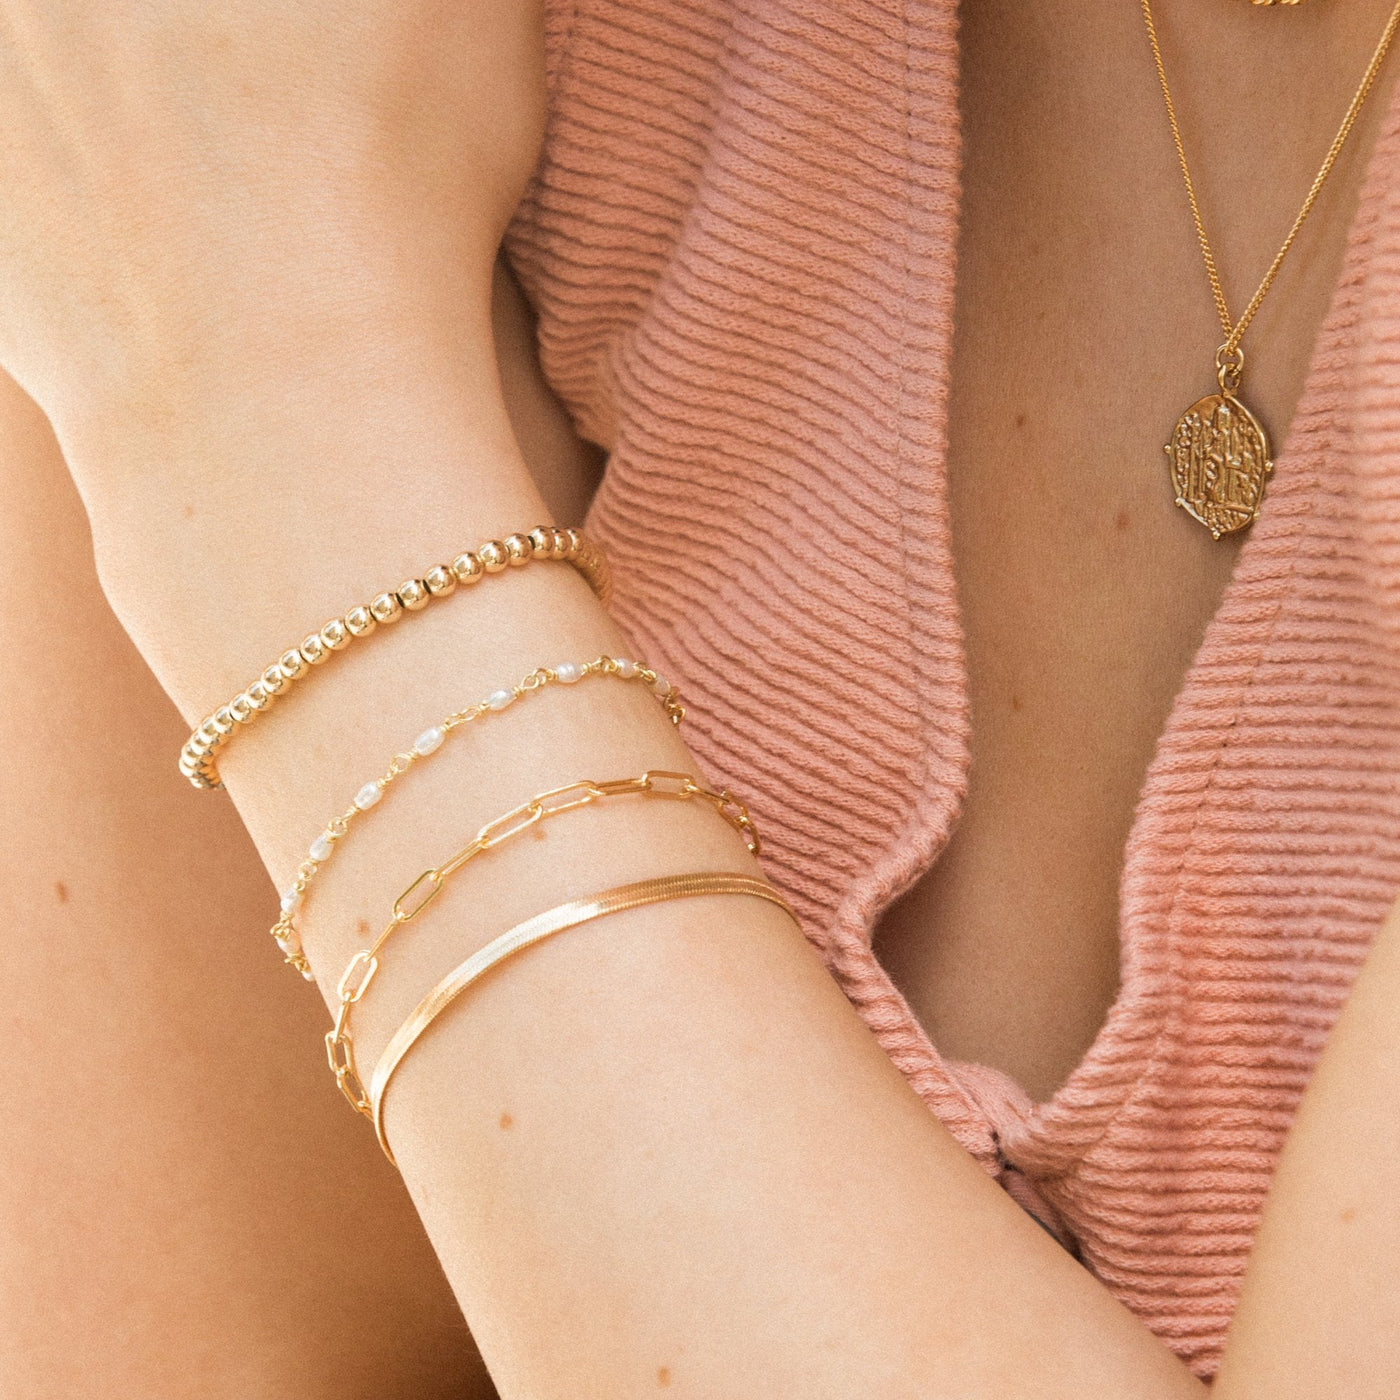 Paperclip Chain Bracelet by Simple & Dainty Jewelry